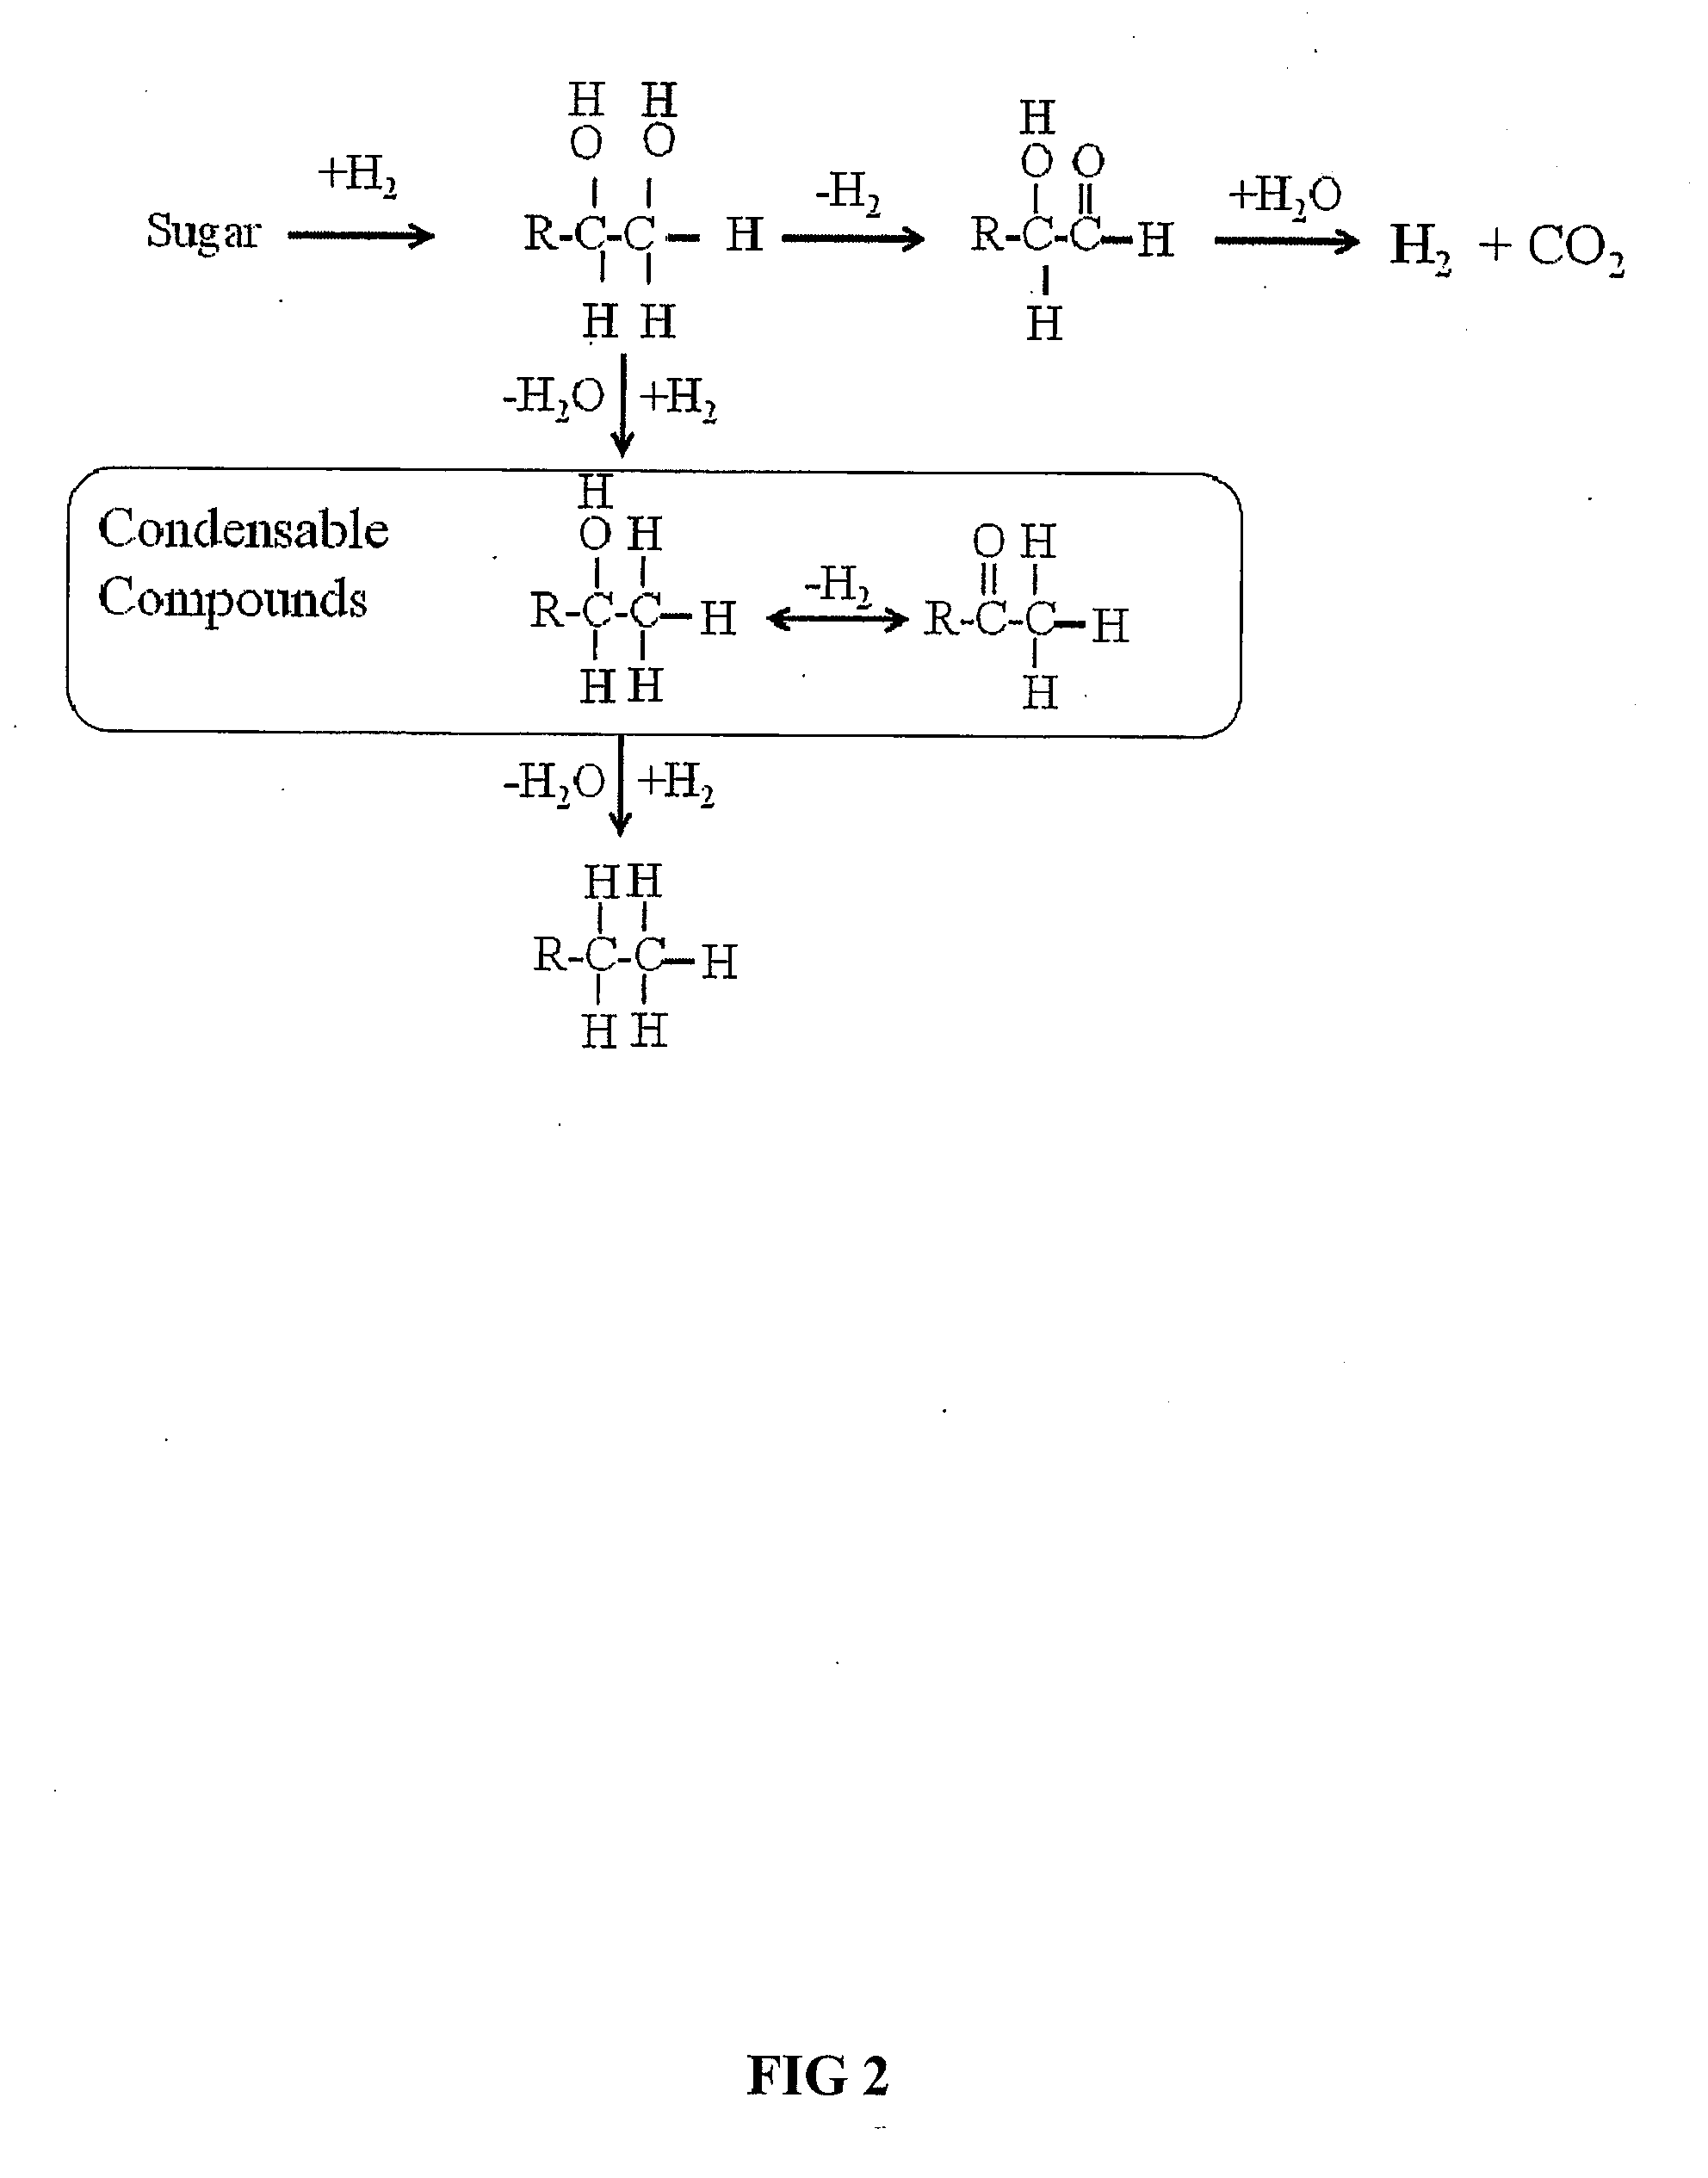 Synthesis of liquid fuels and chemicals from oxygenated hydrocarbons